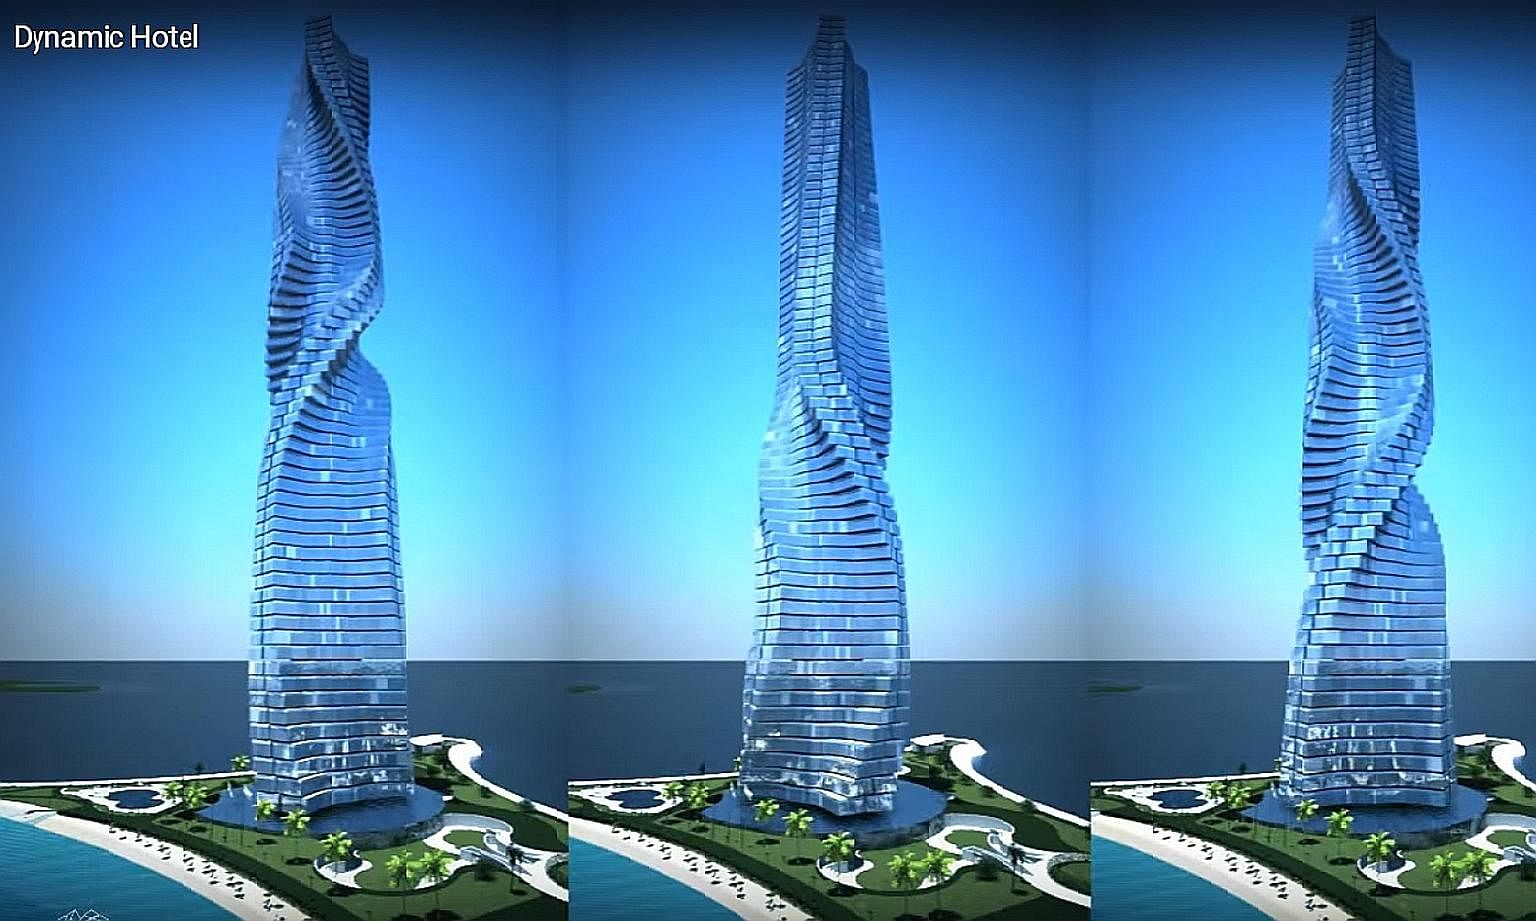 An artist's impression of the Dynamic Tower Hotel, which will be the world's first rotating skyscraper. Residents will be able to control rotation speeds and stop their apartment from spinning.